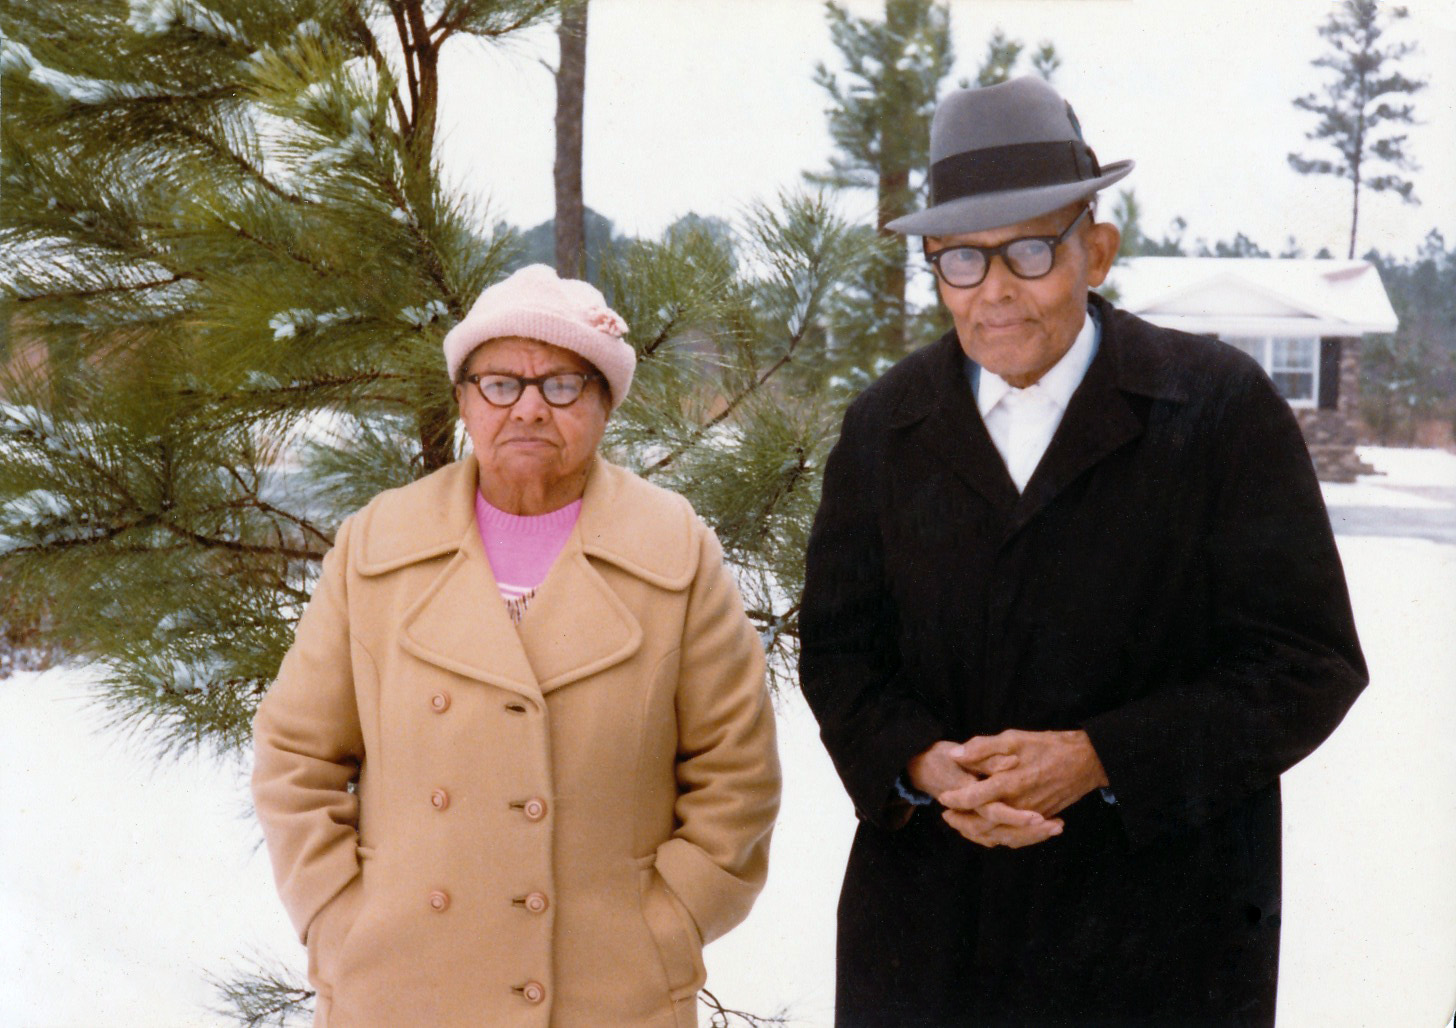 These are my paternal great-grandparents Charles and Ella Hawkins (my grandfather's parents), standing outside their home in Lake City, S.C. in the snow. View full size.